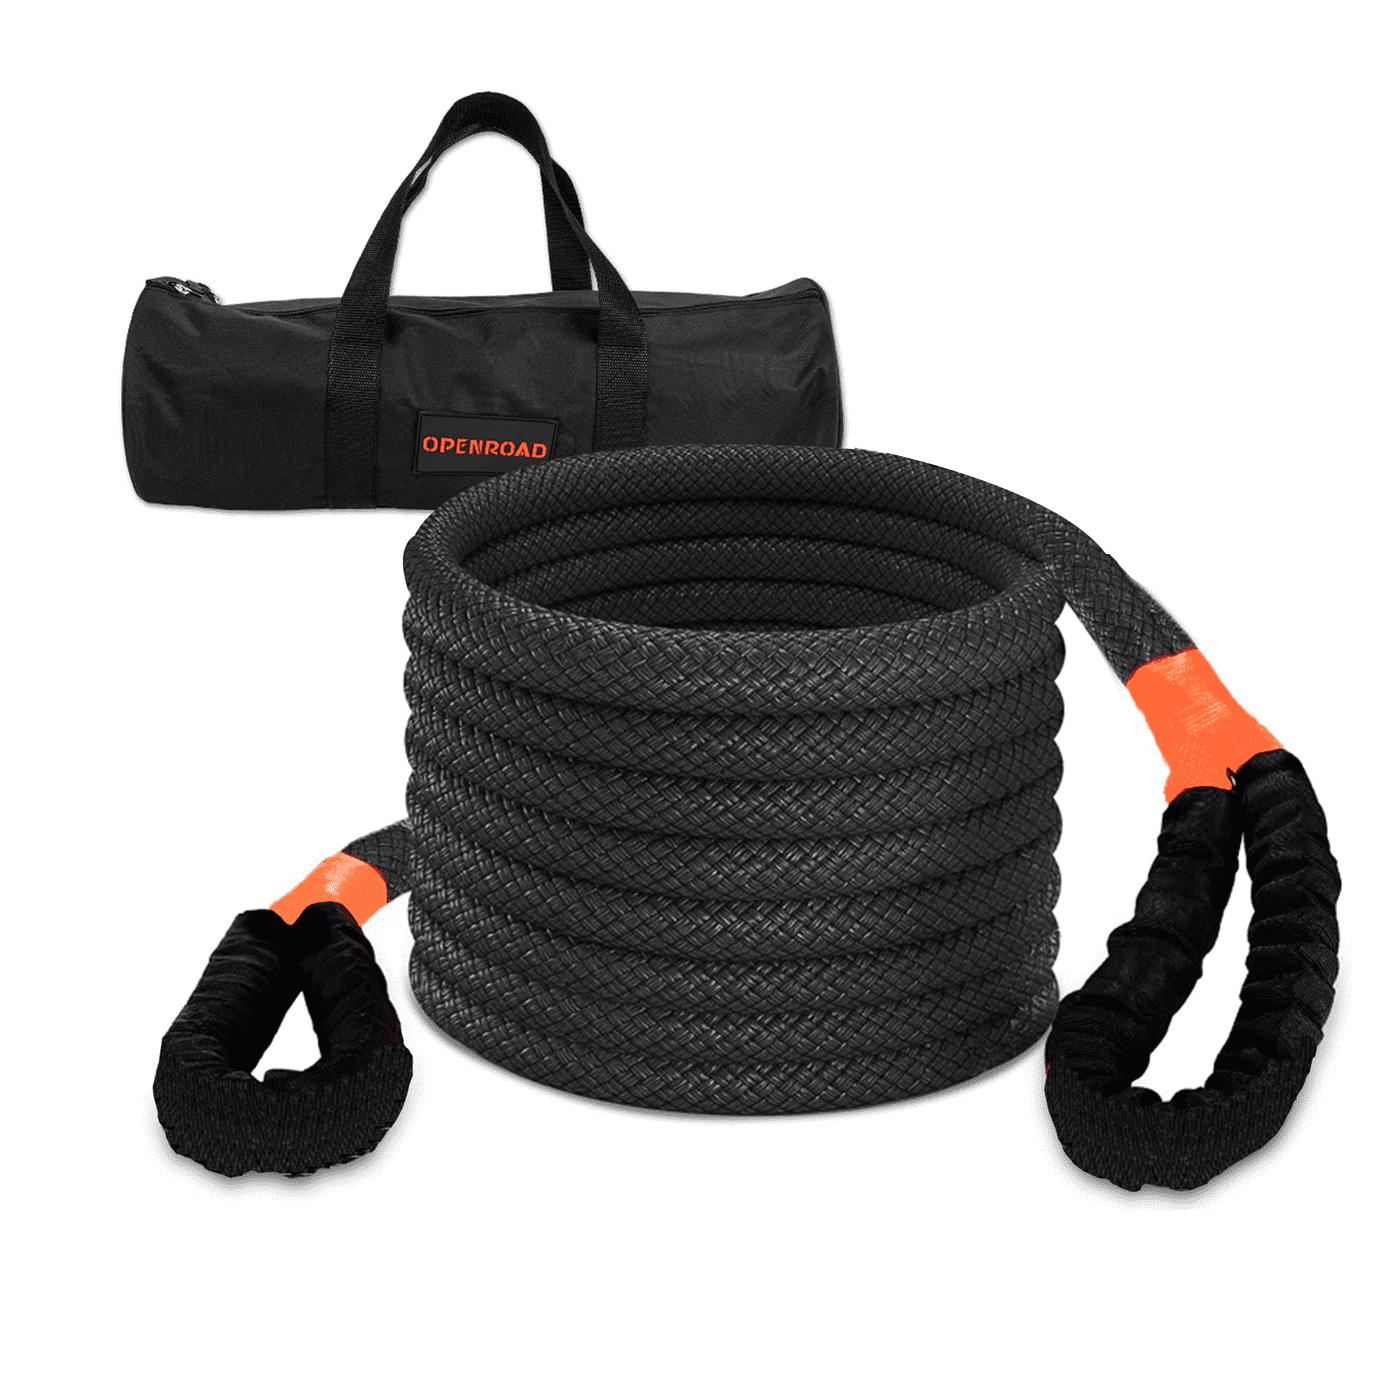 OPENROAD 1" x30' Kinetic Recovery Tow Rope (25,000lbs)，for Truck Off-Road Vehicle ATV UTV, Carry Bag Included,Orange Recovery Straps OPENROAD   